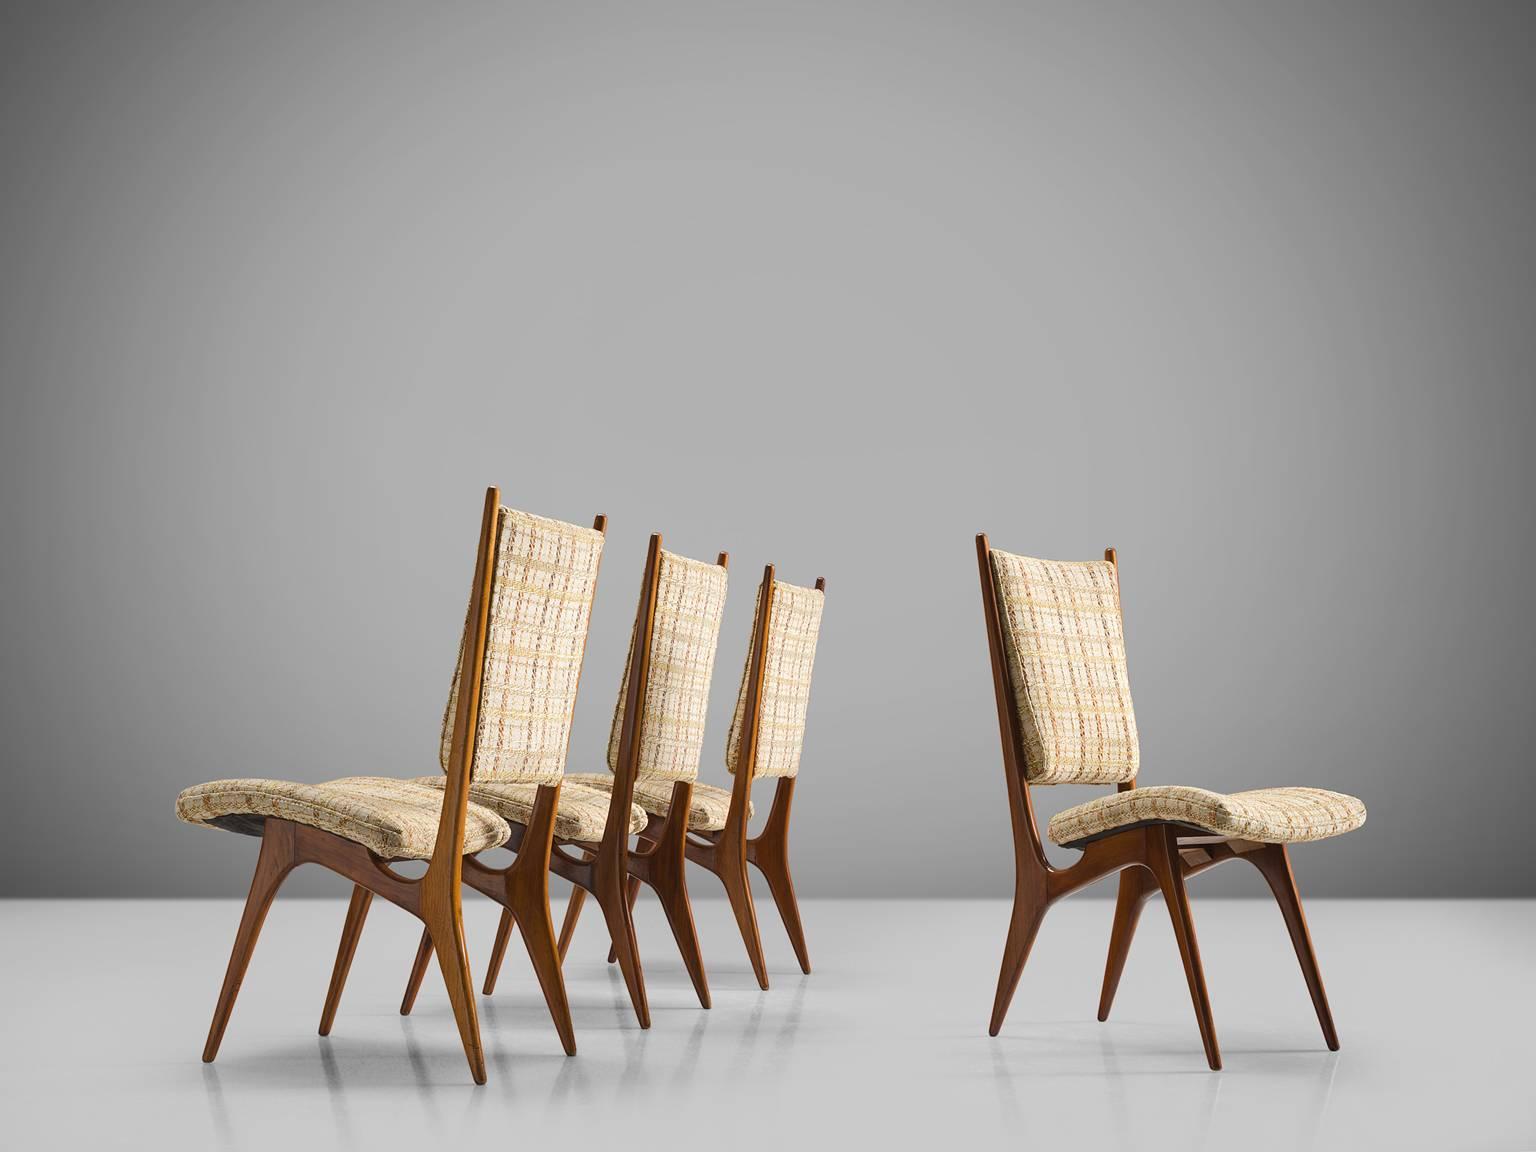 Vladimir Kagan, set of four dining chairs, walnut, cane, fabric, United States, circa 1955.

This set of chairs is designed by Vladimir Kagan for Hugo Dreyfuss. The set of four chairs is sensuous, sculptural and elegant. The chairs feature high